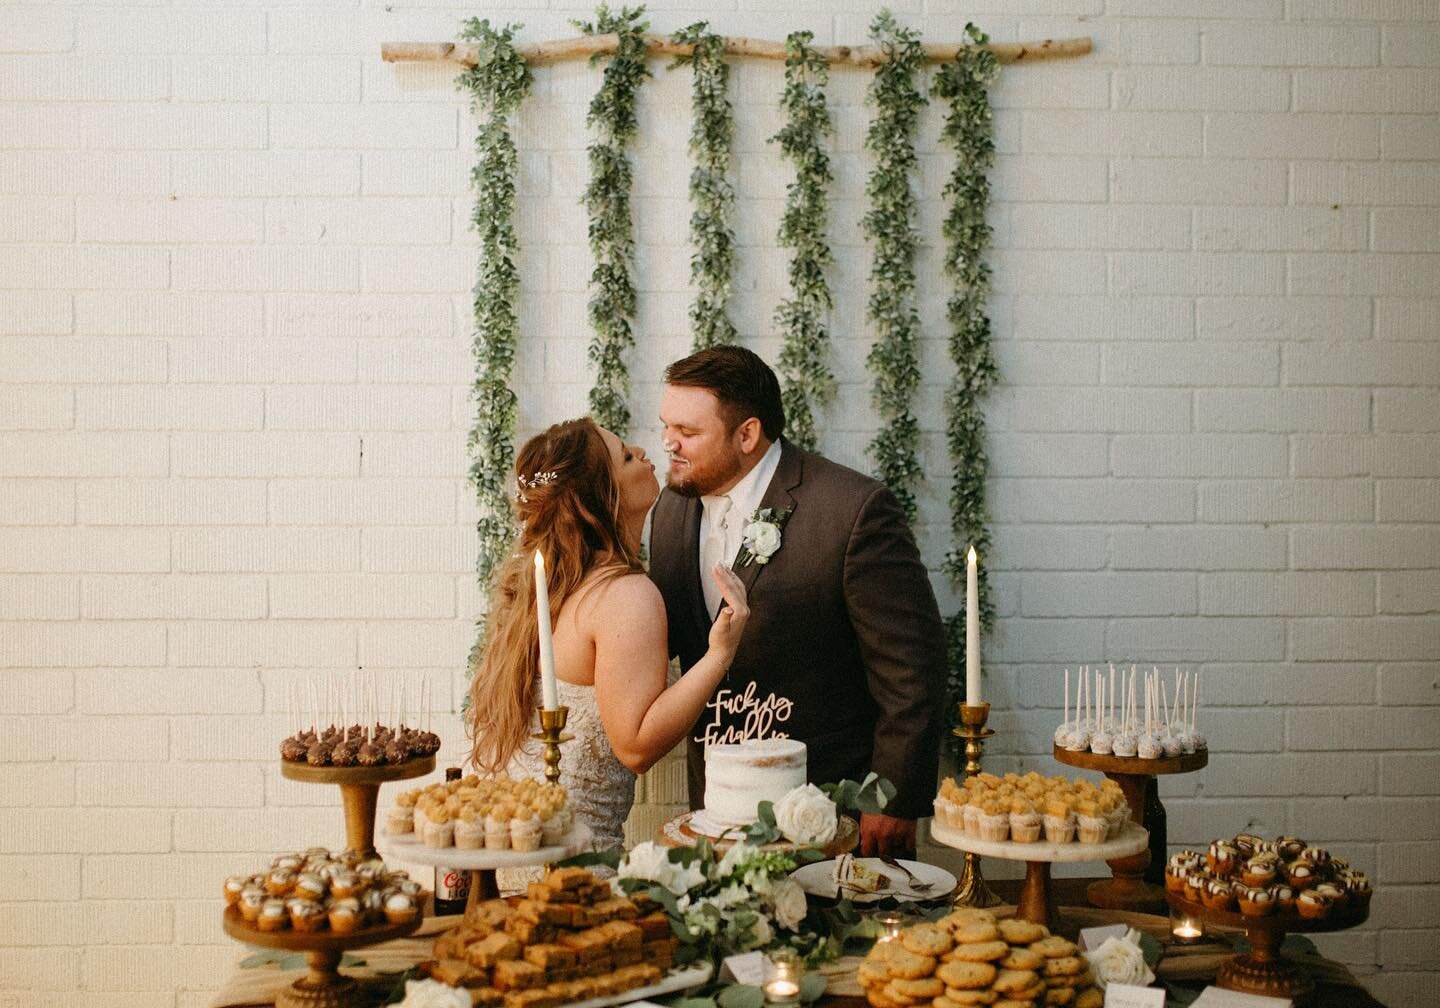 Hello everyone! Hope everyone is doing well! 
I have some exciting news about some changes coming to my business to celebrate the new year coming soon&hellip;..but for now, enjoy this sweet couple celebrating their cake cutting!!💚
Be back soon,
xoxo